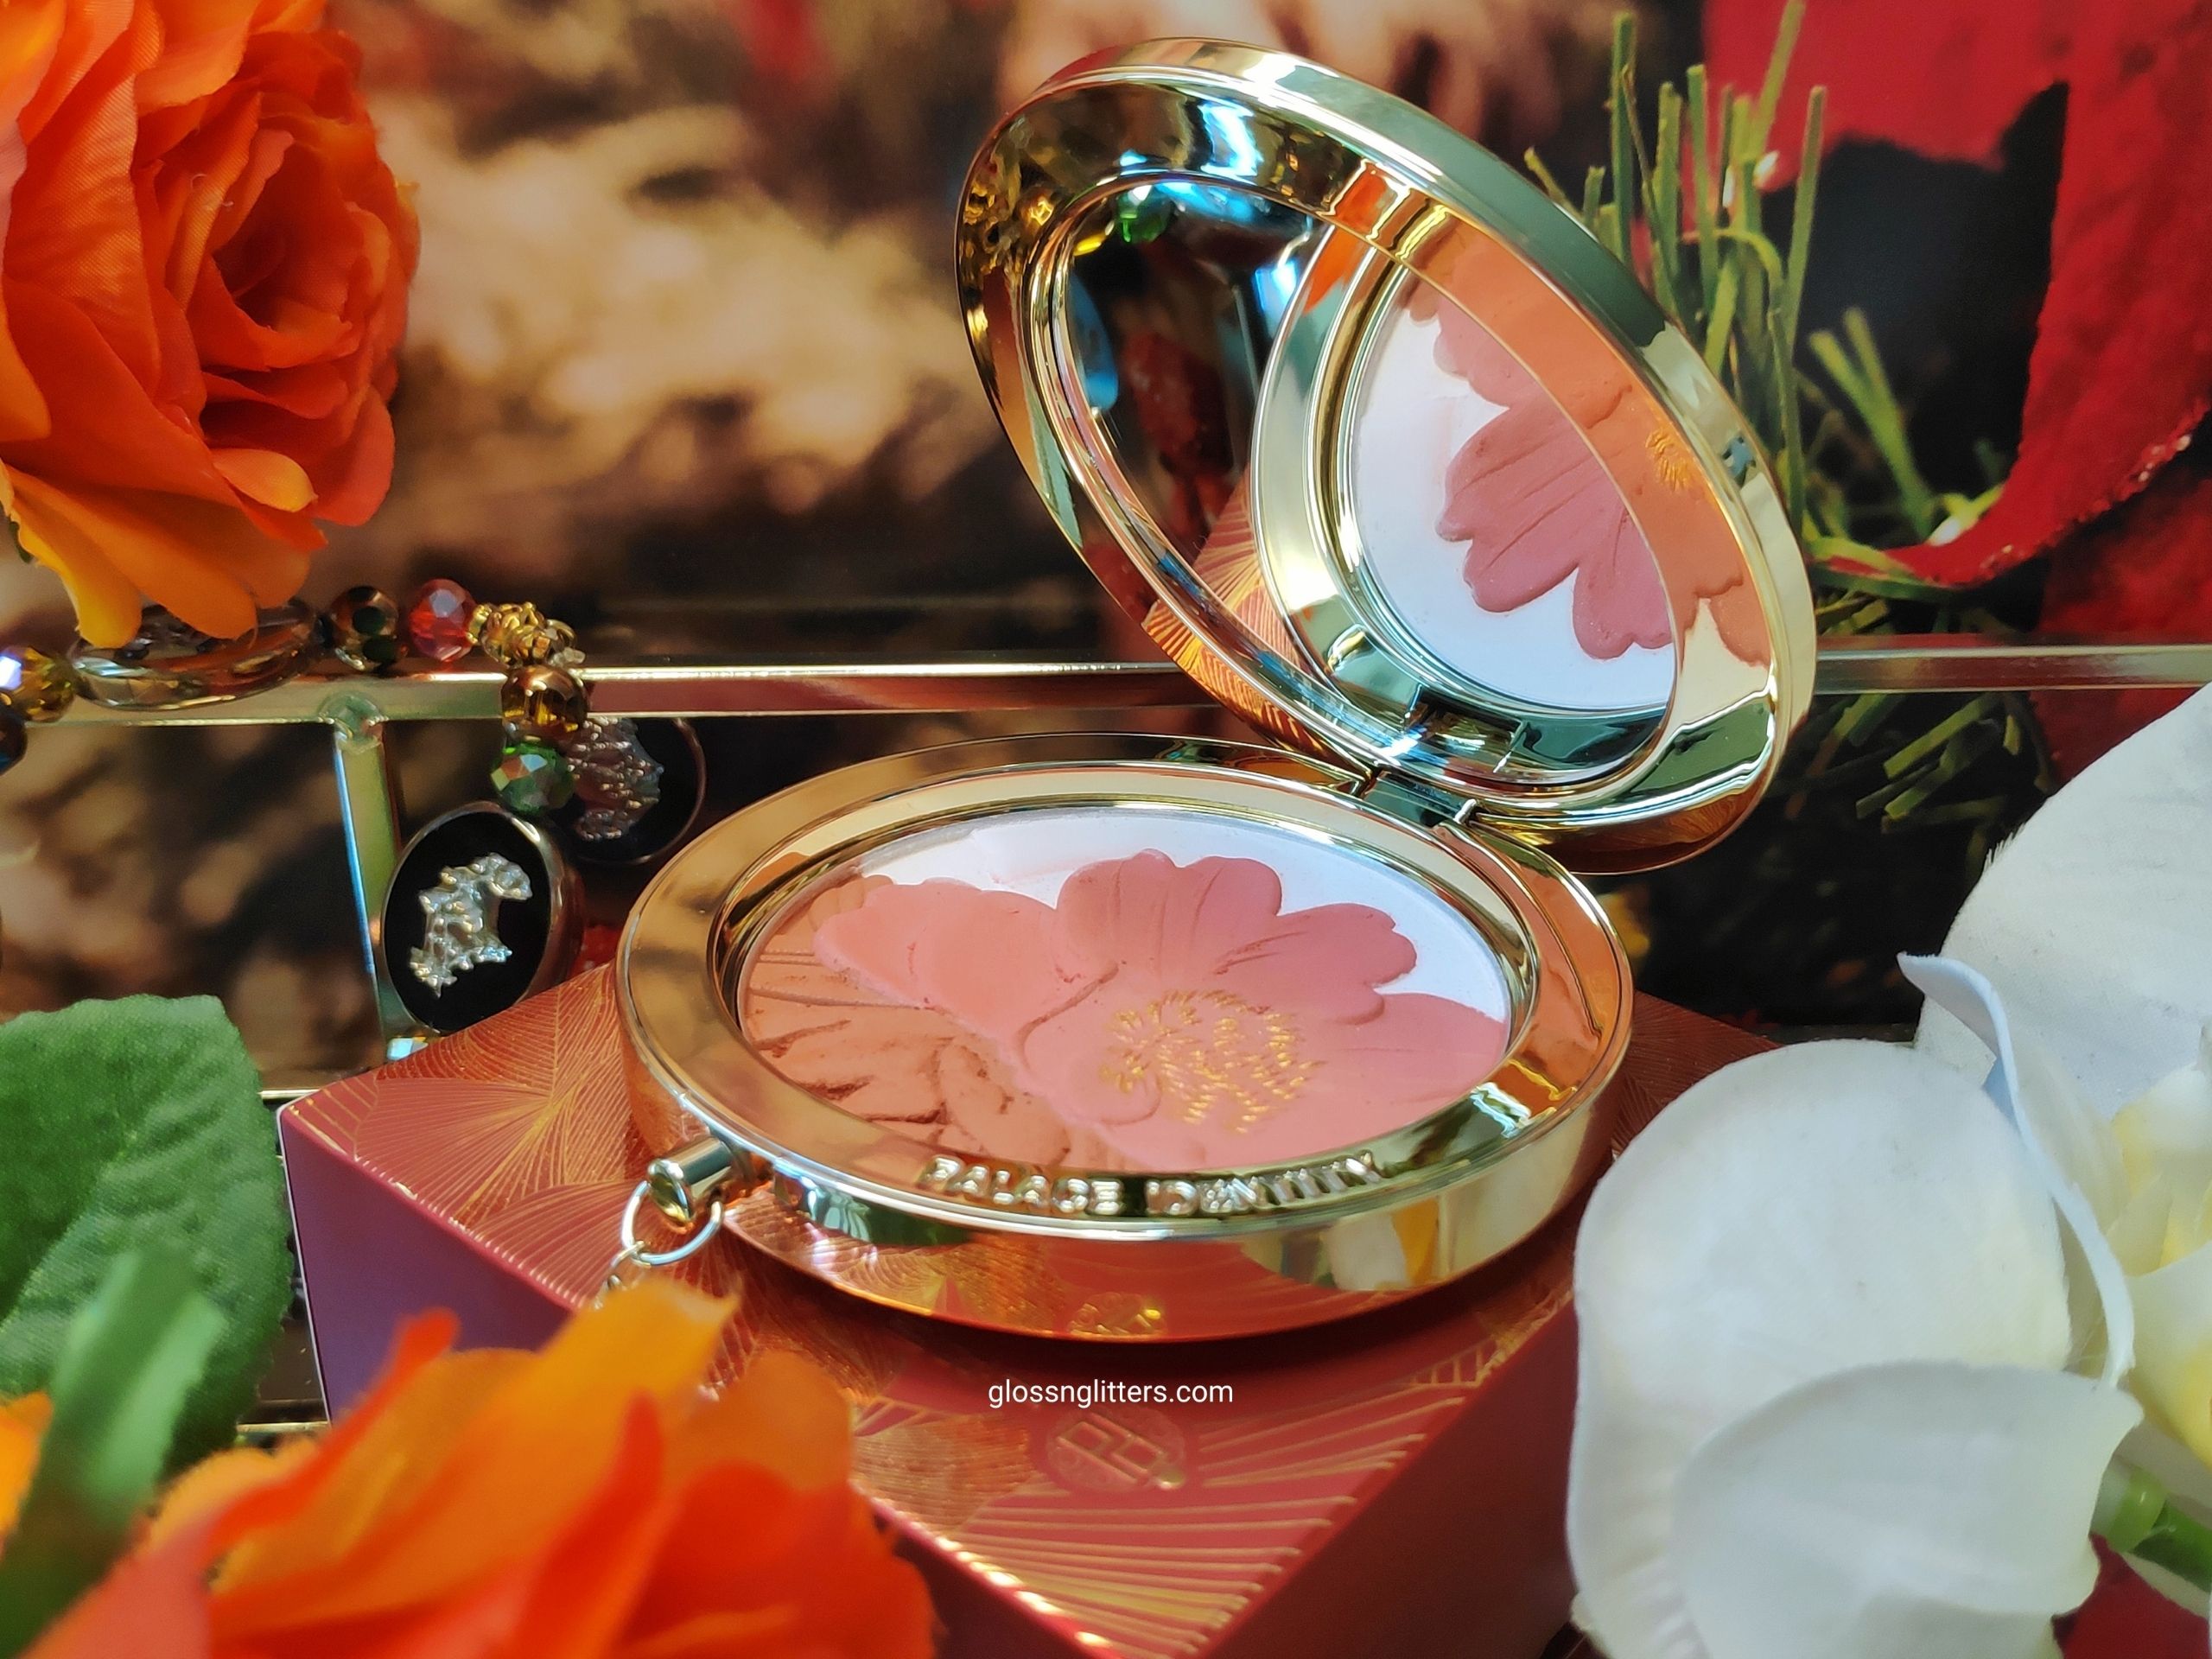 Zeesea Cosmetics Peony Blush Review  Swatches - Glossnglitters